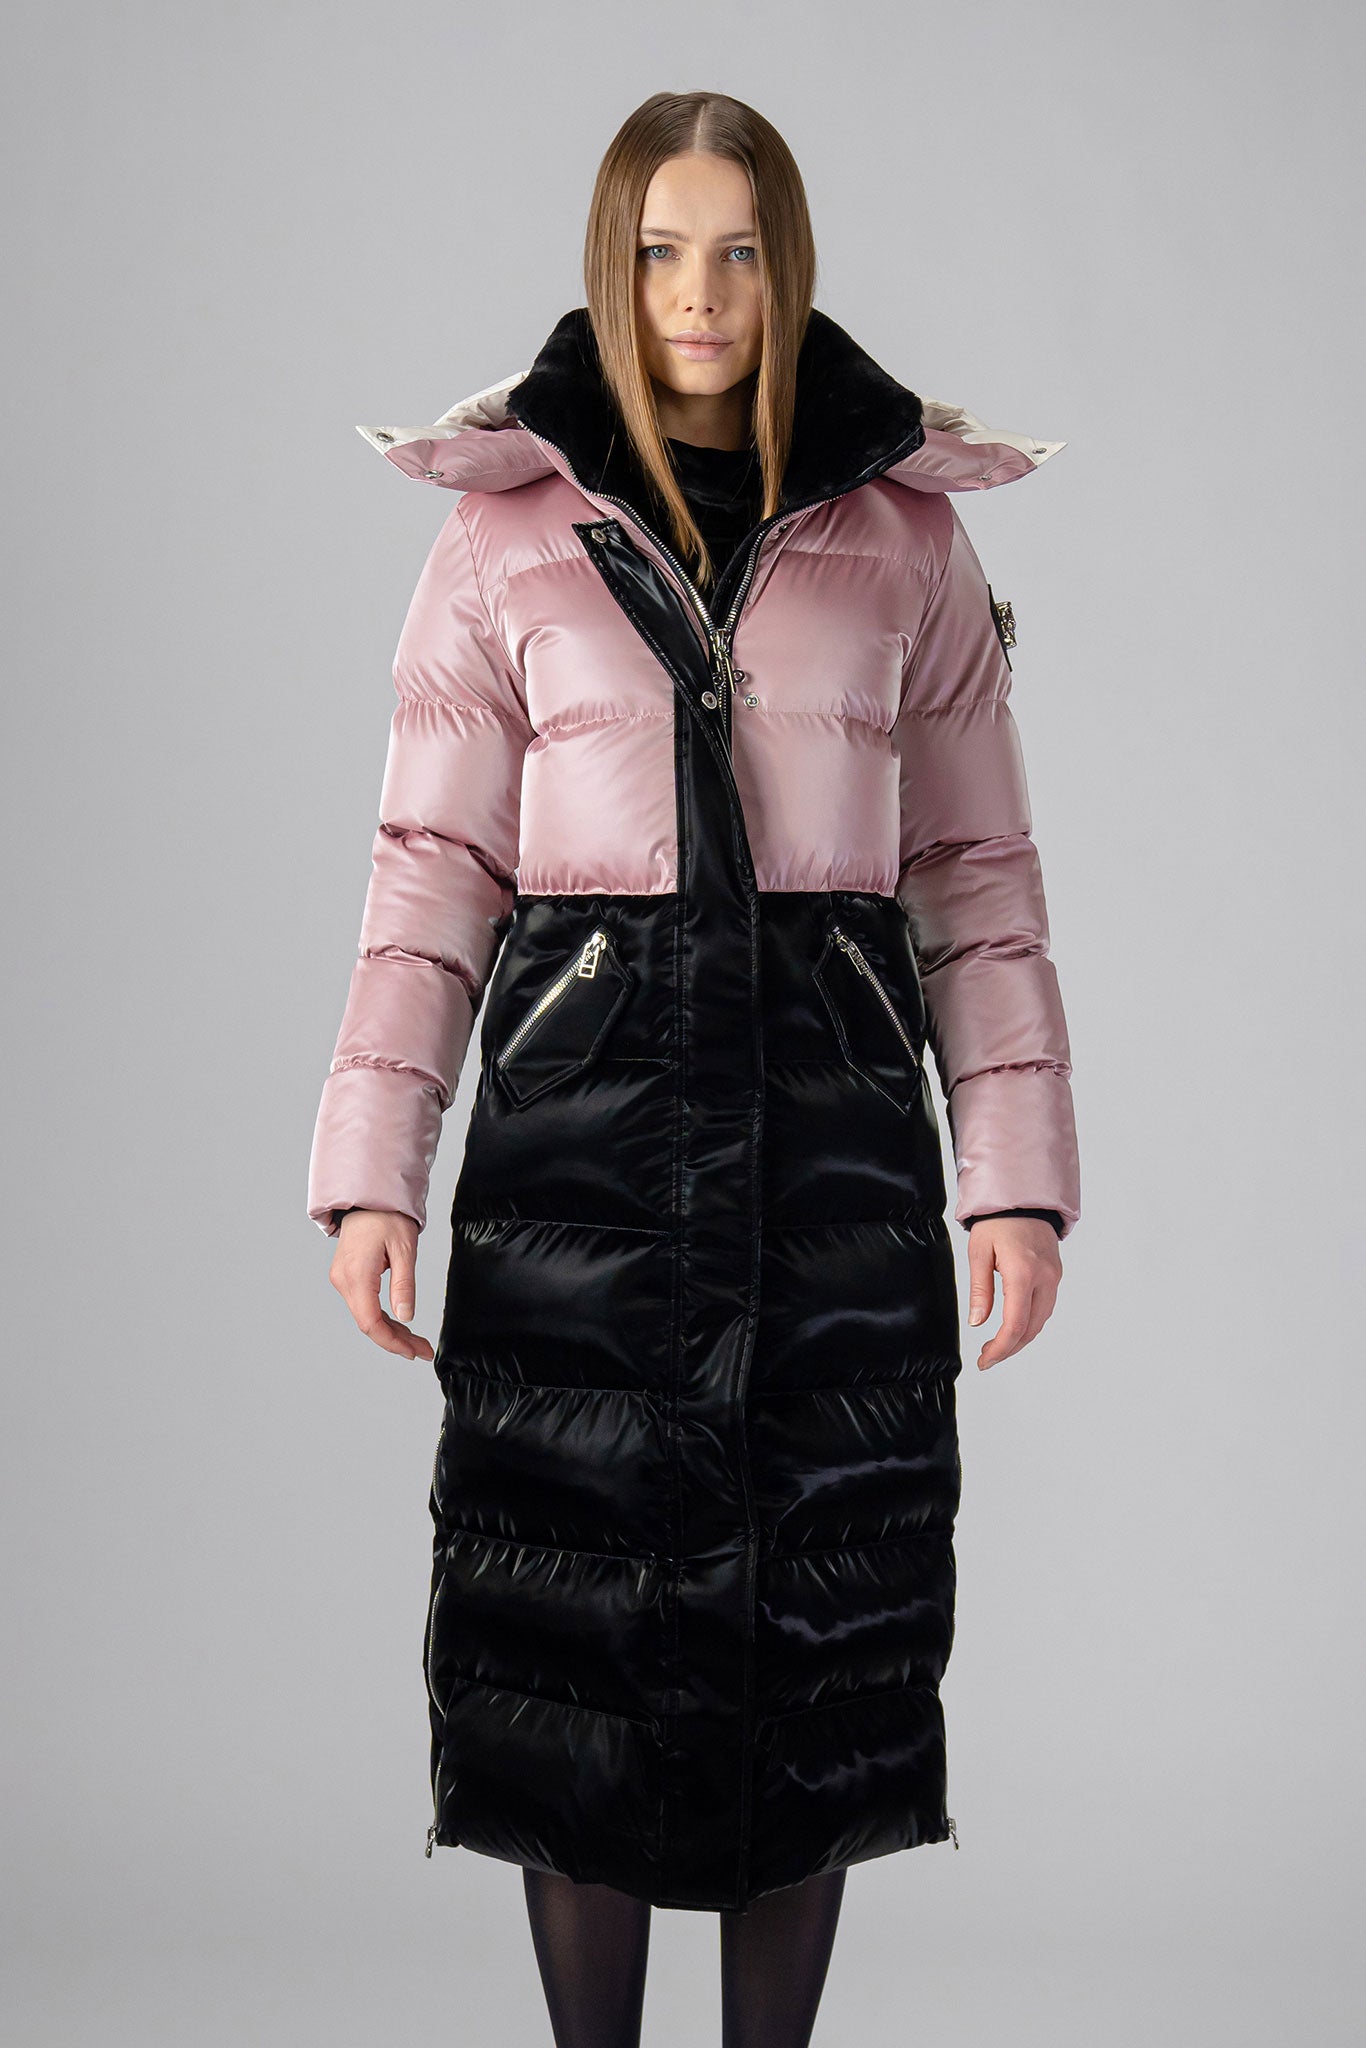 Woodpecker Women's Extra Long Bird of Paradise Winter coat. High-end Canadian designer winter coat for women in “Arctic Rose and Black